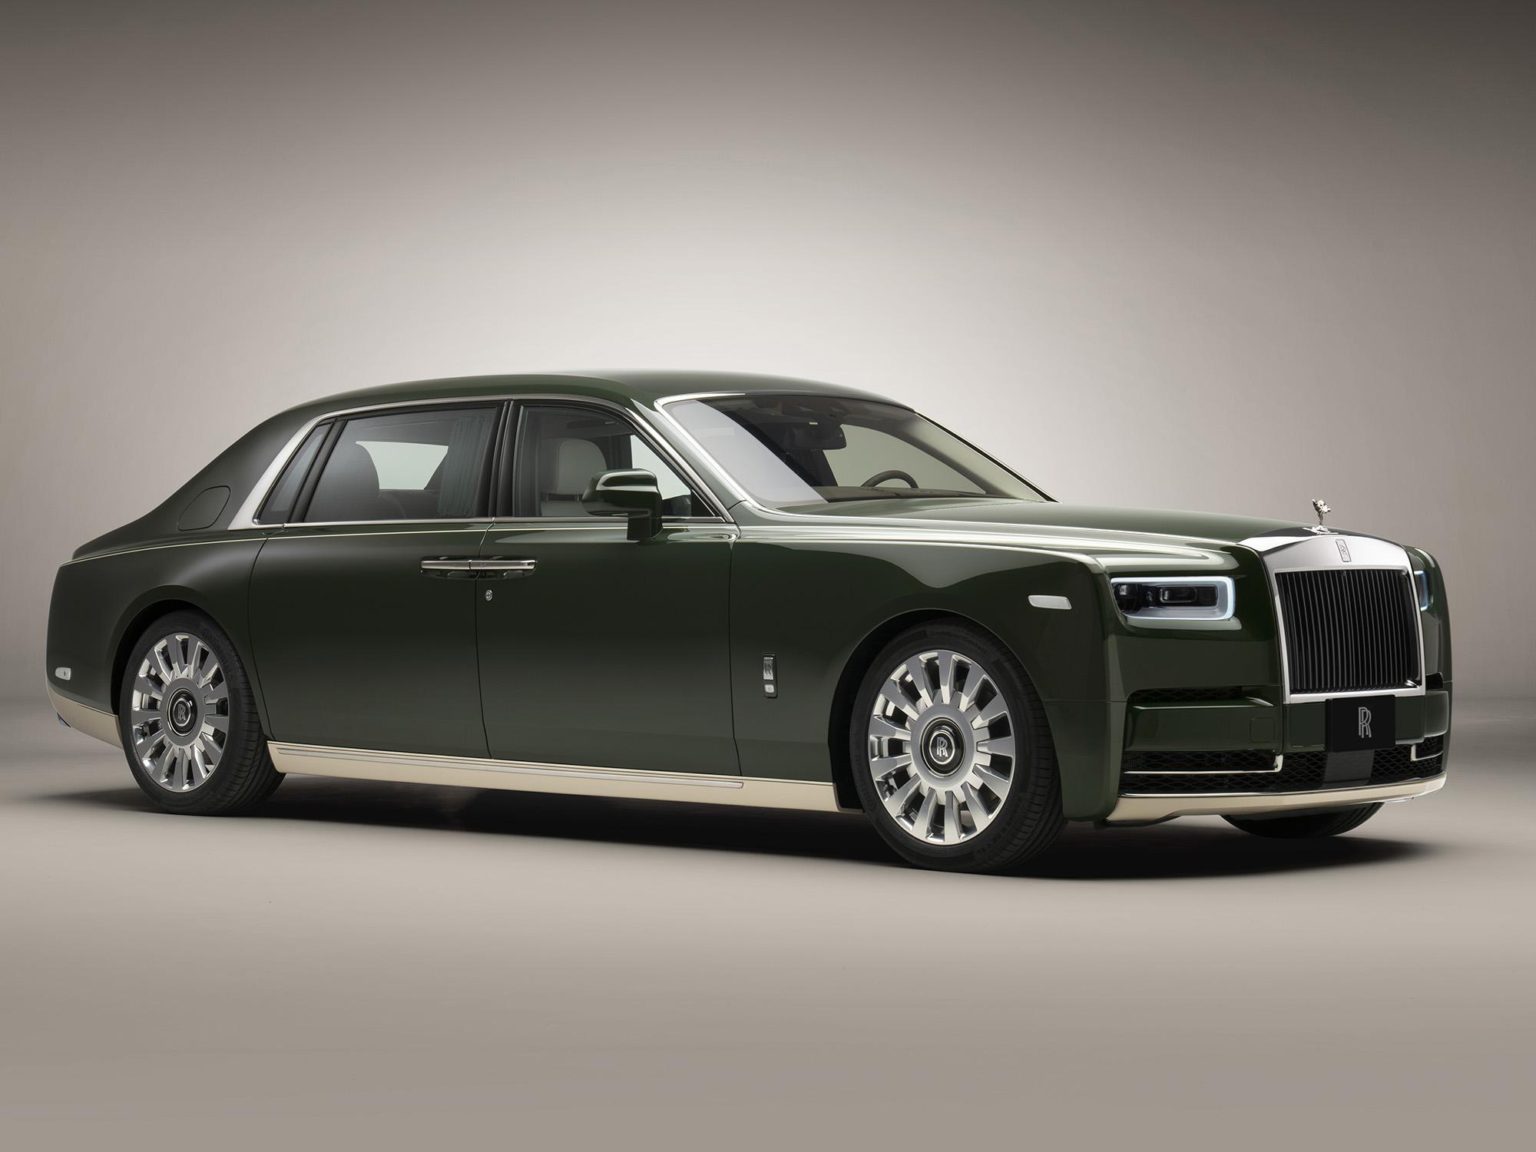 This one-off Rolls-Royce Phantom is the result of a partnership with Hermès.